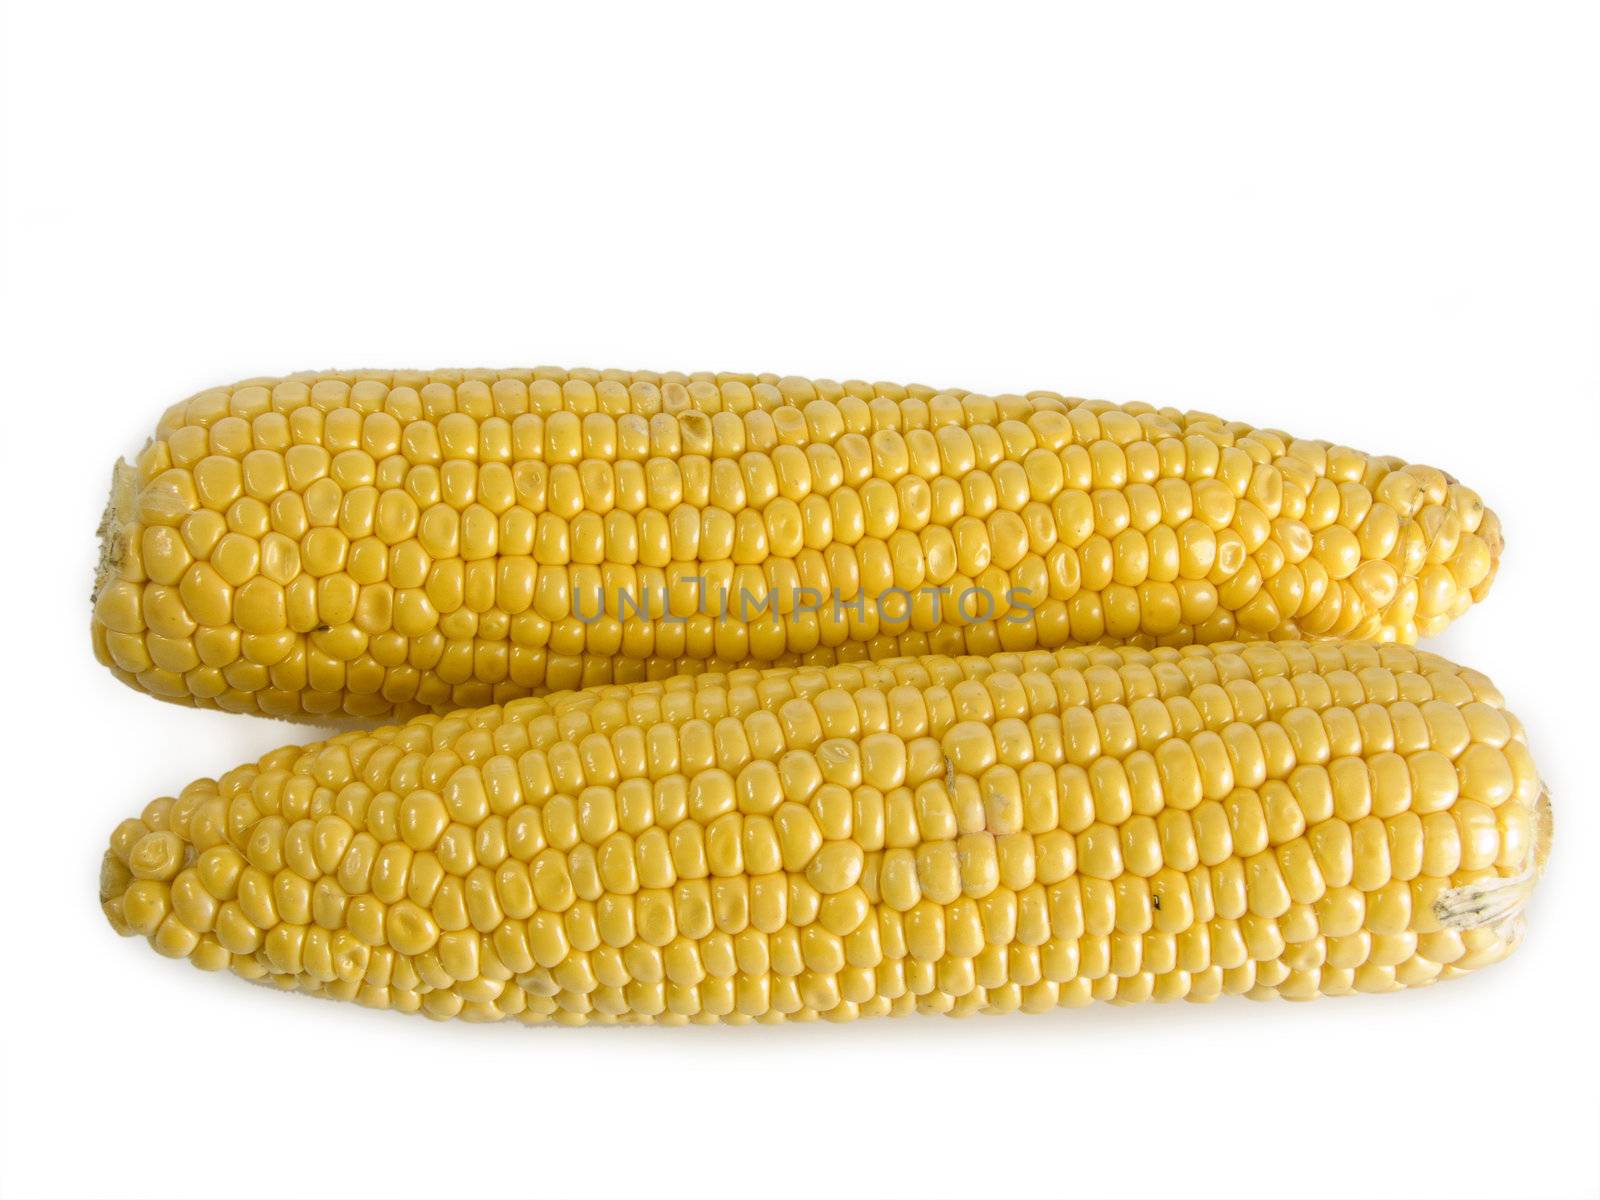 Two fresh corn-cobs over white background